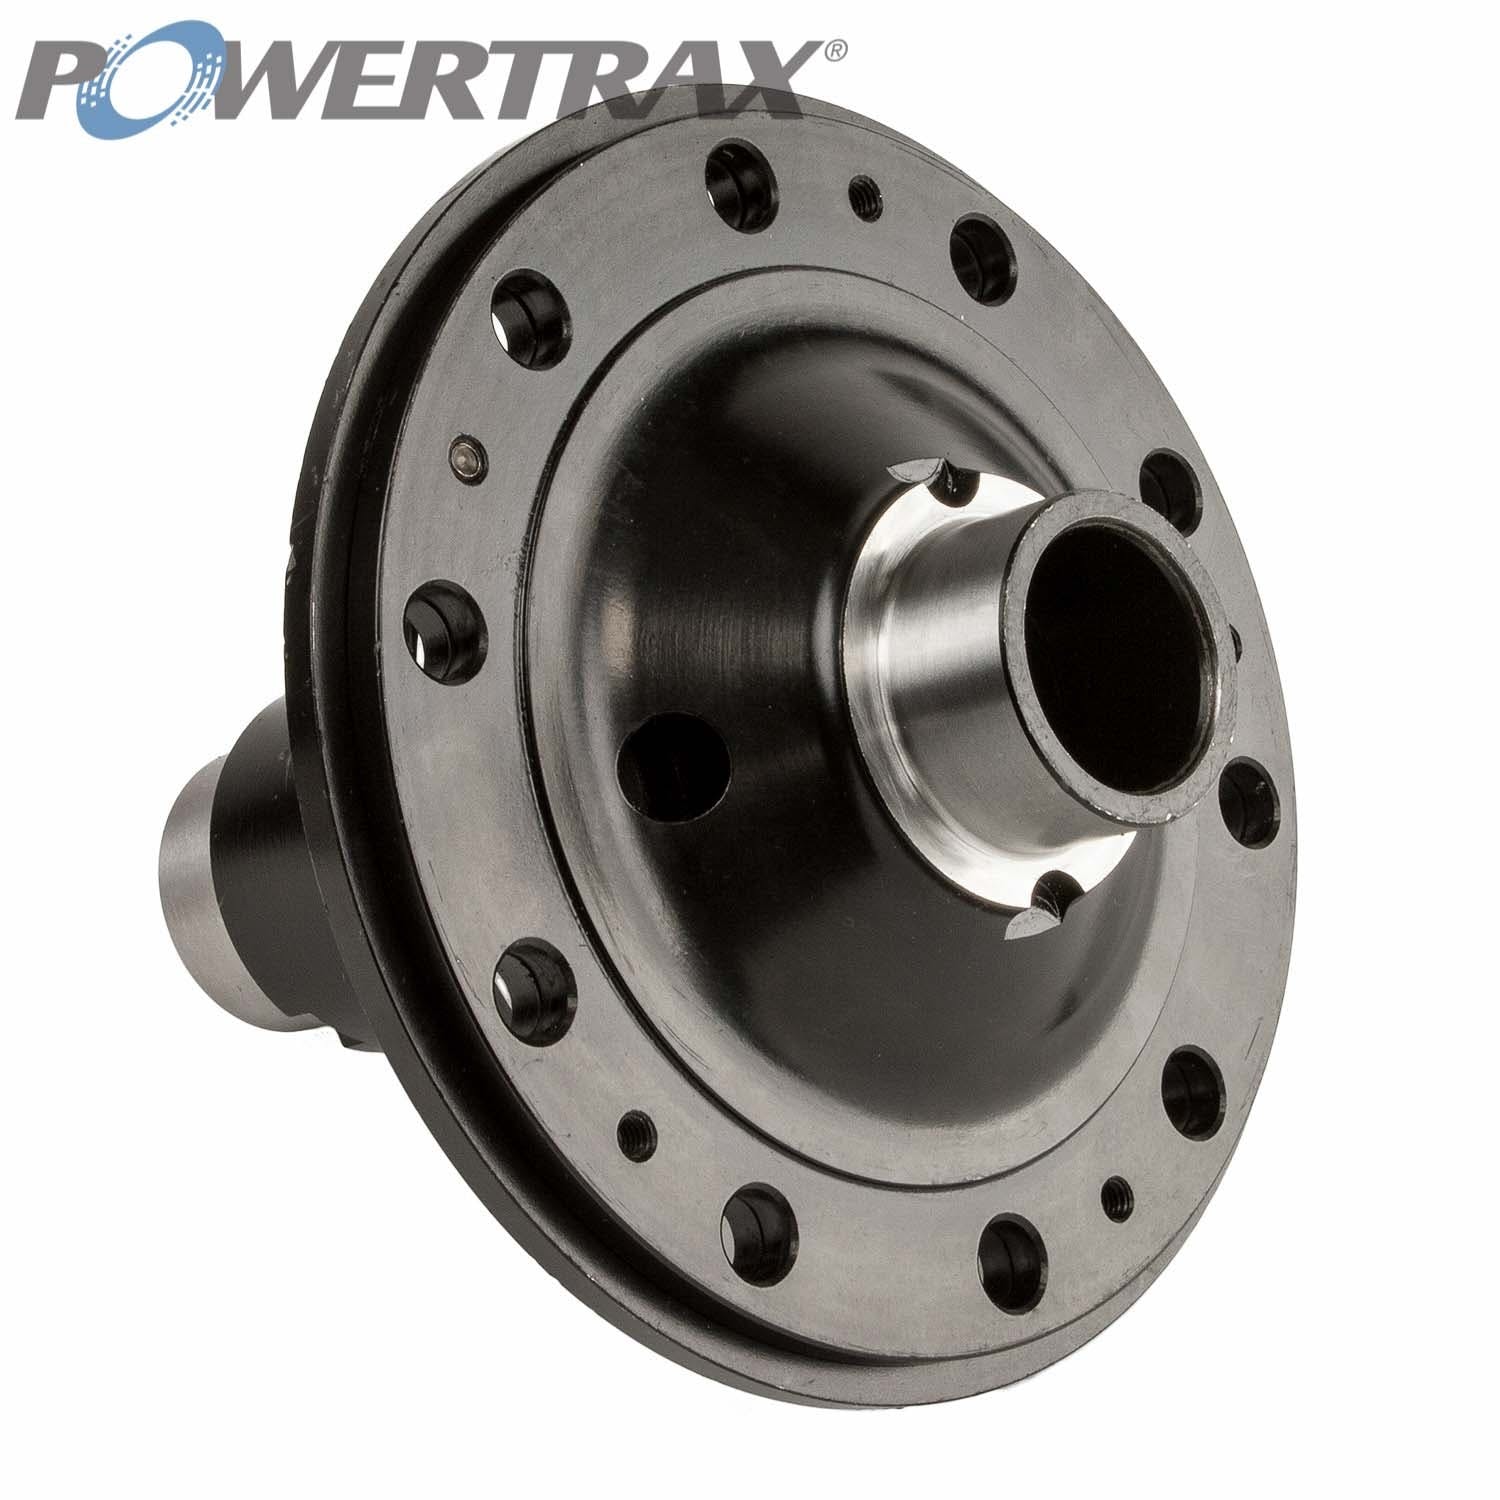 PowerTrax LK443527 Differential Lock Assembly